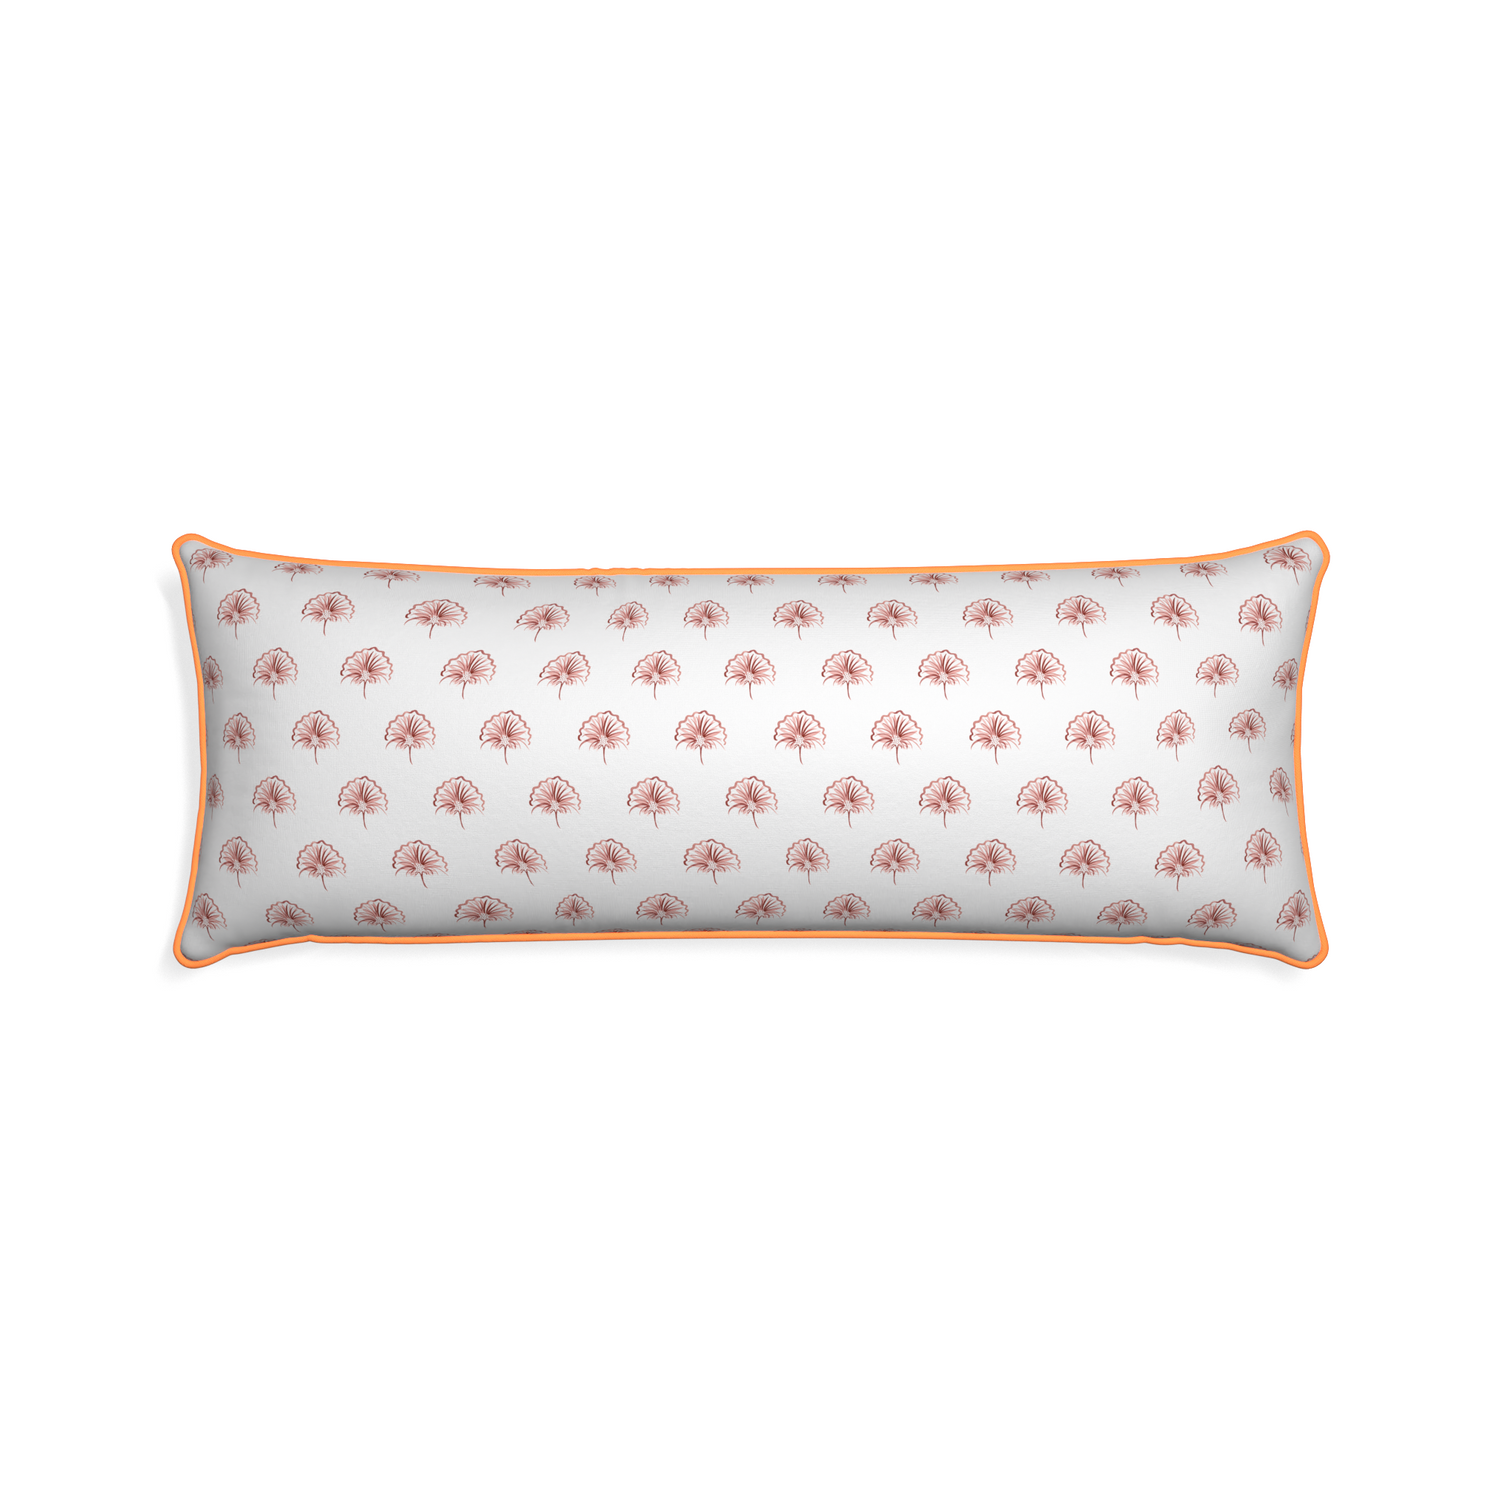 Xl-lumbar penelope rose custom floral pinkpillow with clementine piping on white background